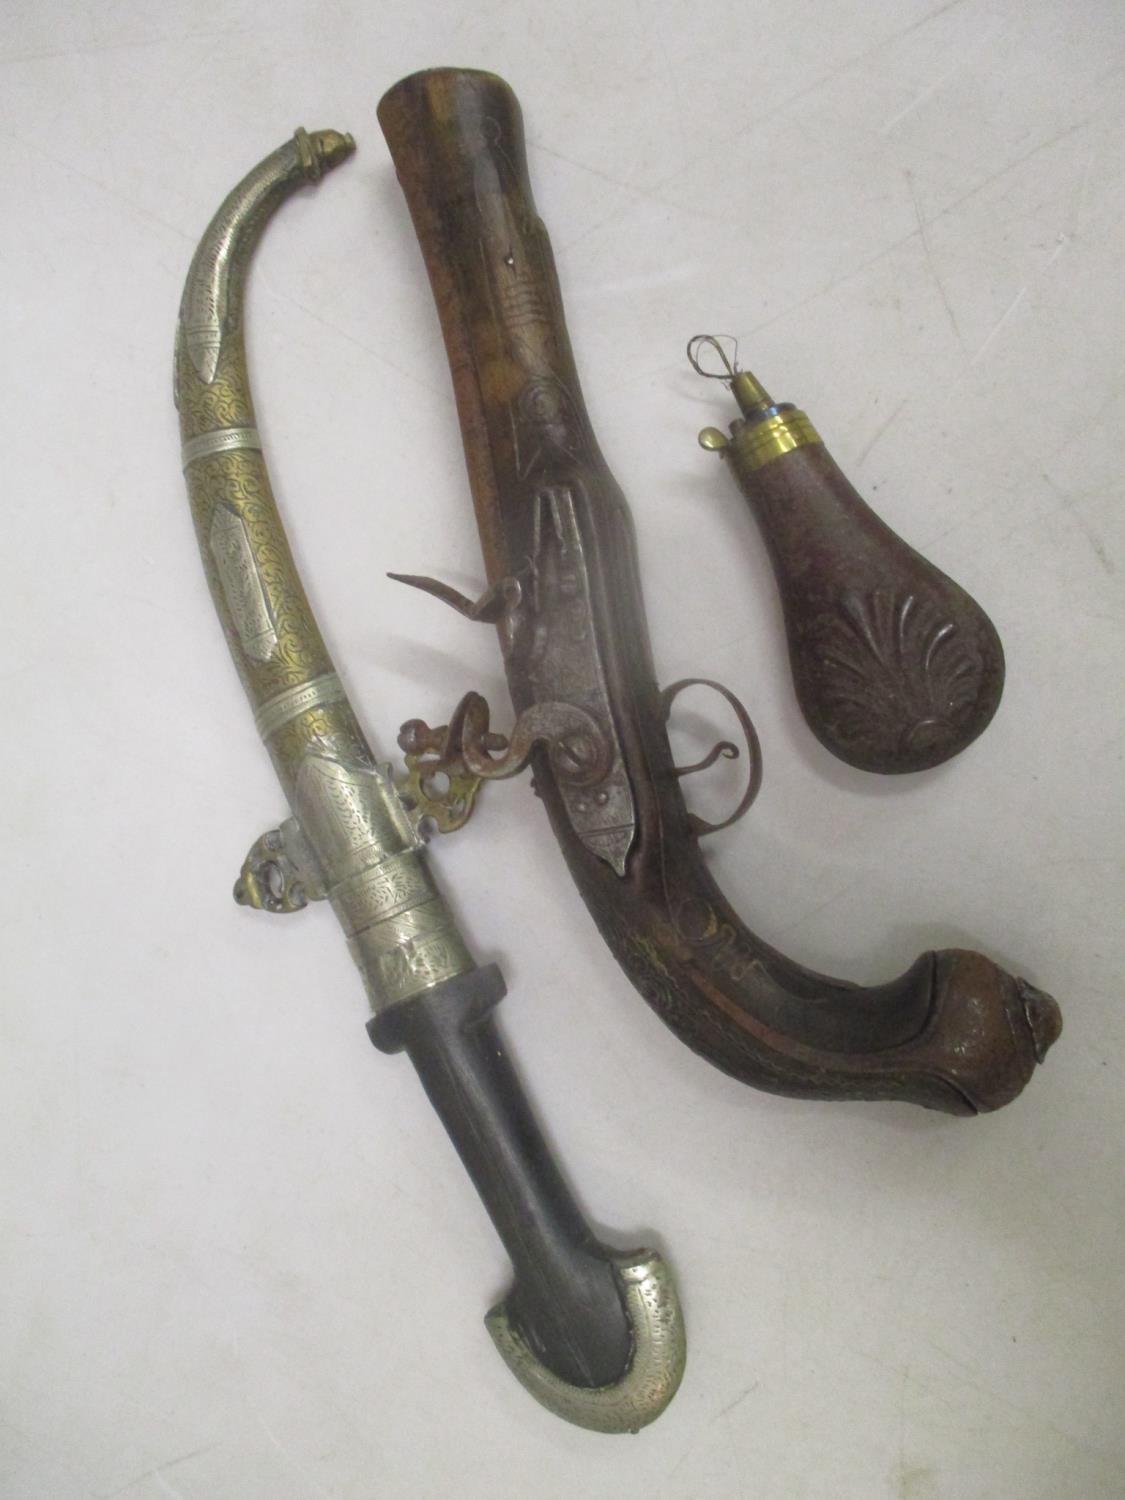 An Eastern knife with a curved blade, an inlaid flintlock pistol and a pressed metal shot flask